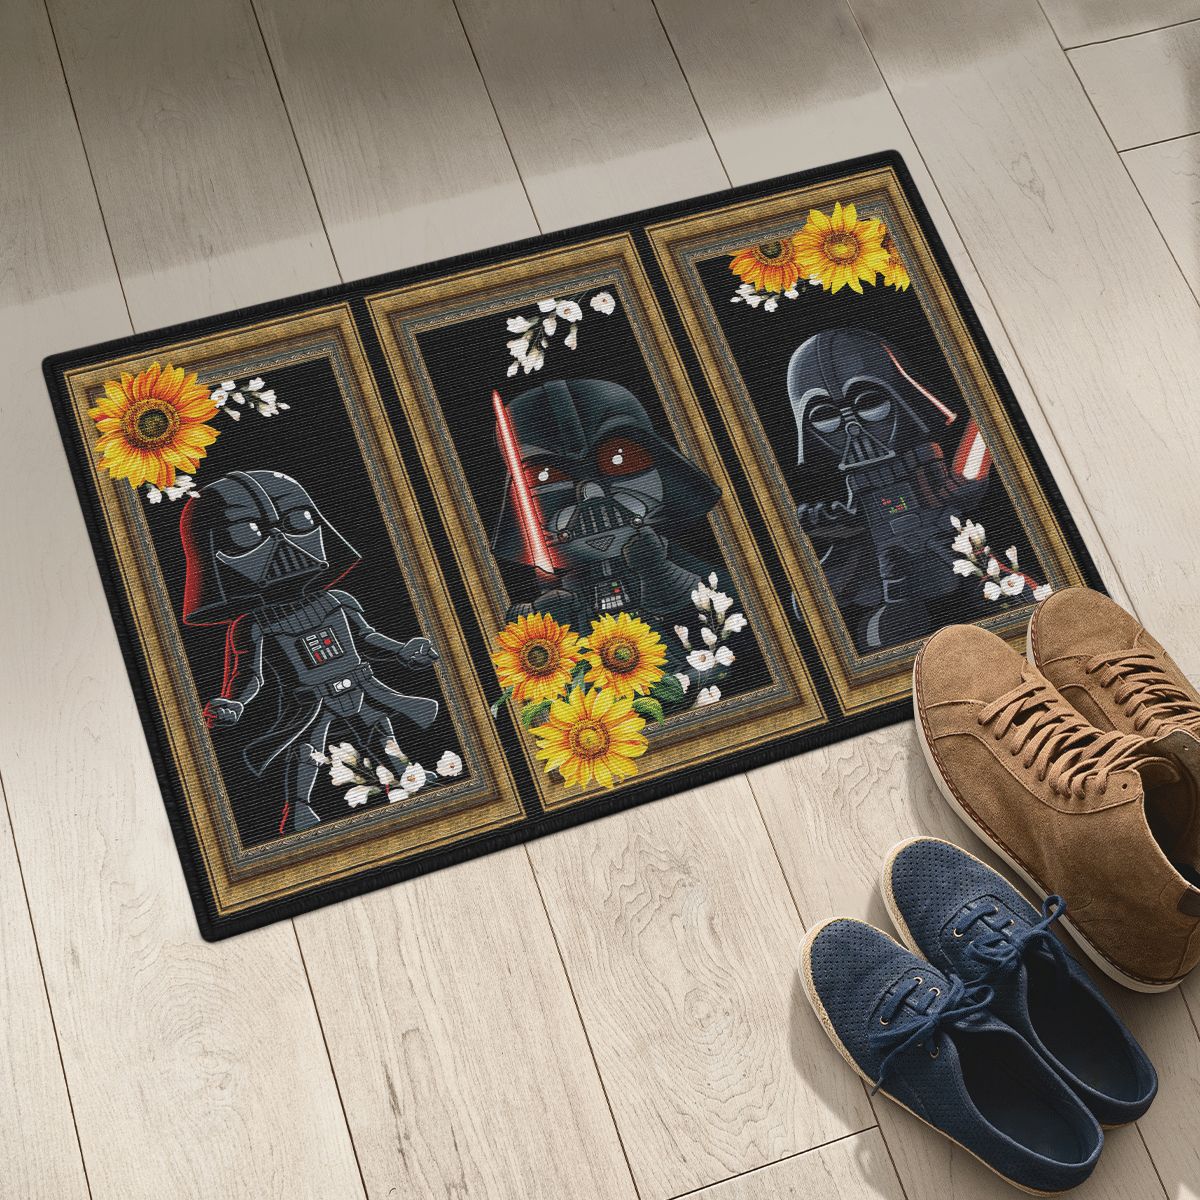 TOP 10 HOT RUG AND DOORMAT FOR STAR WARS MOVIE FAN